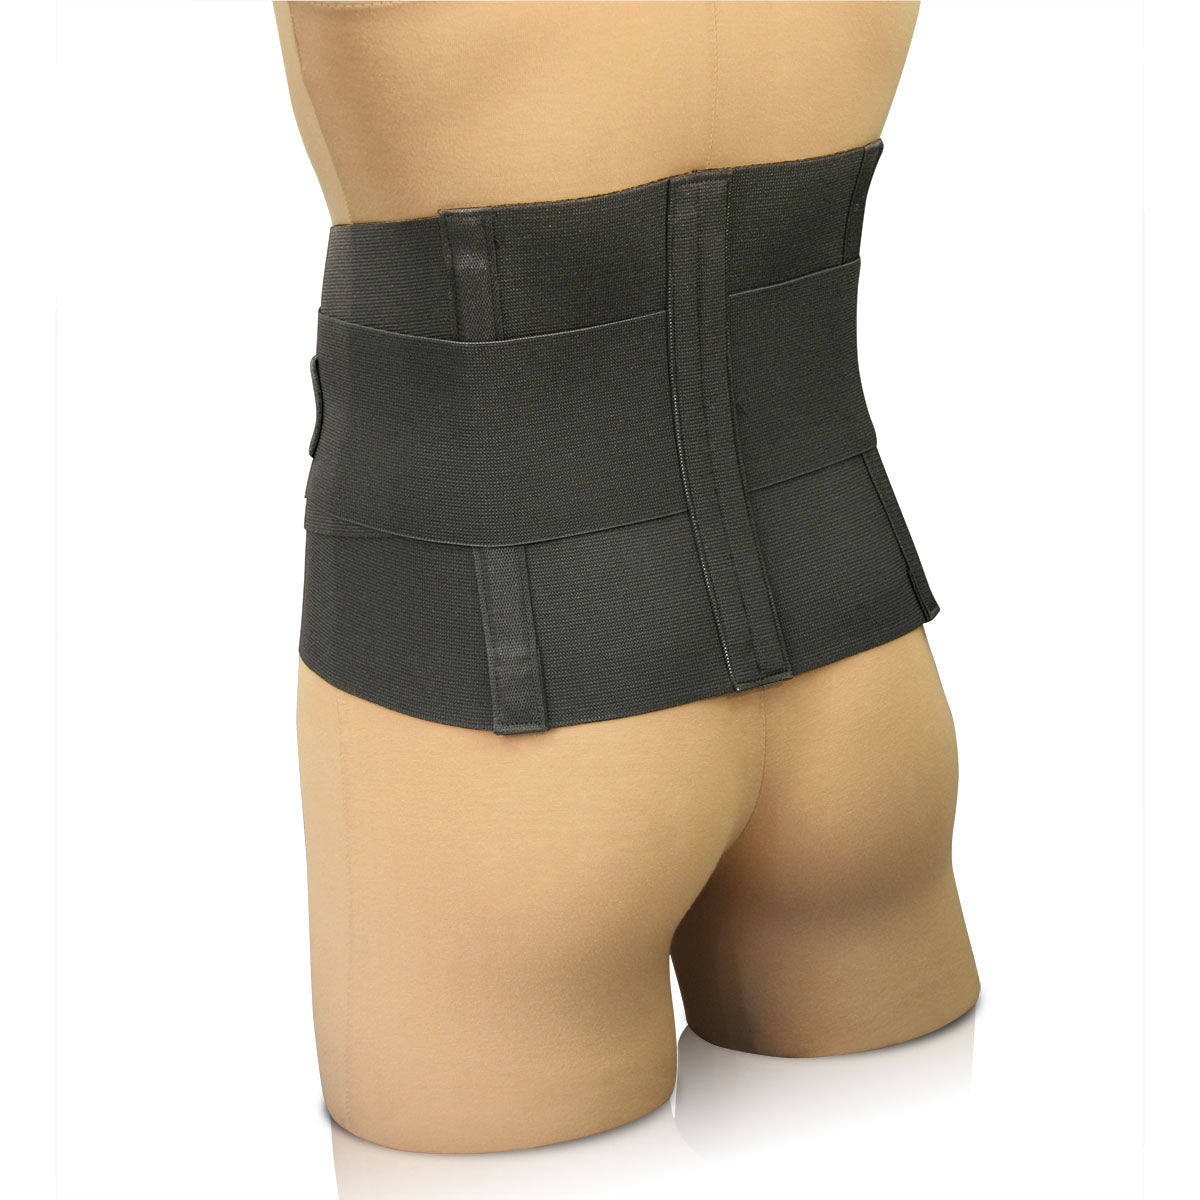 Lumbar Sacral Support DCSO, Small, Fits Waist 26" - 30"